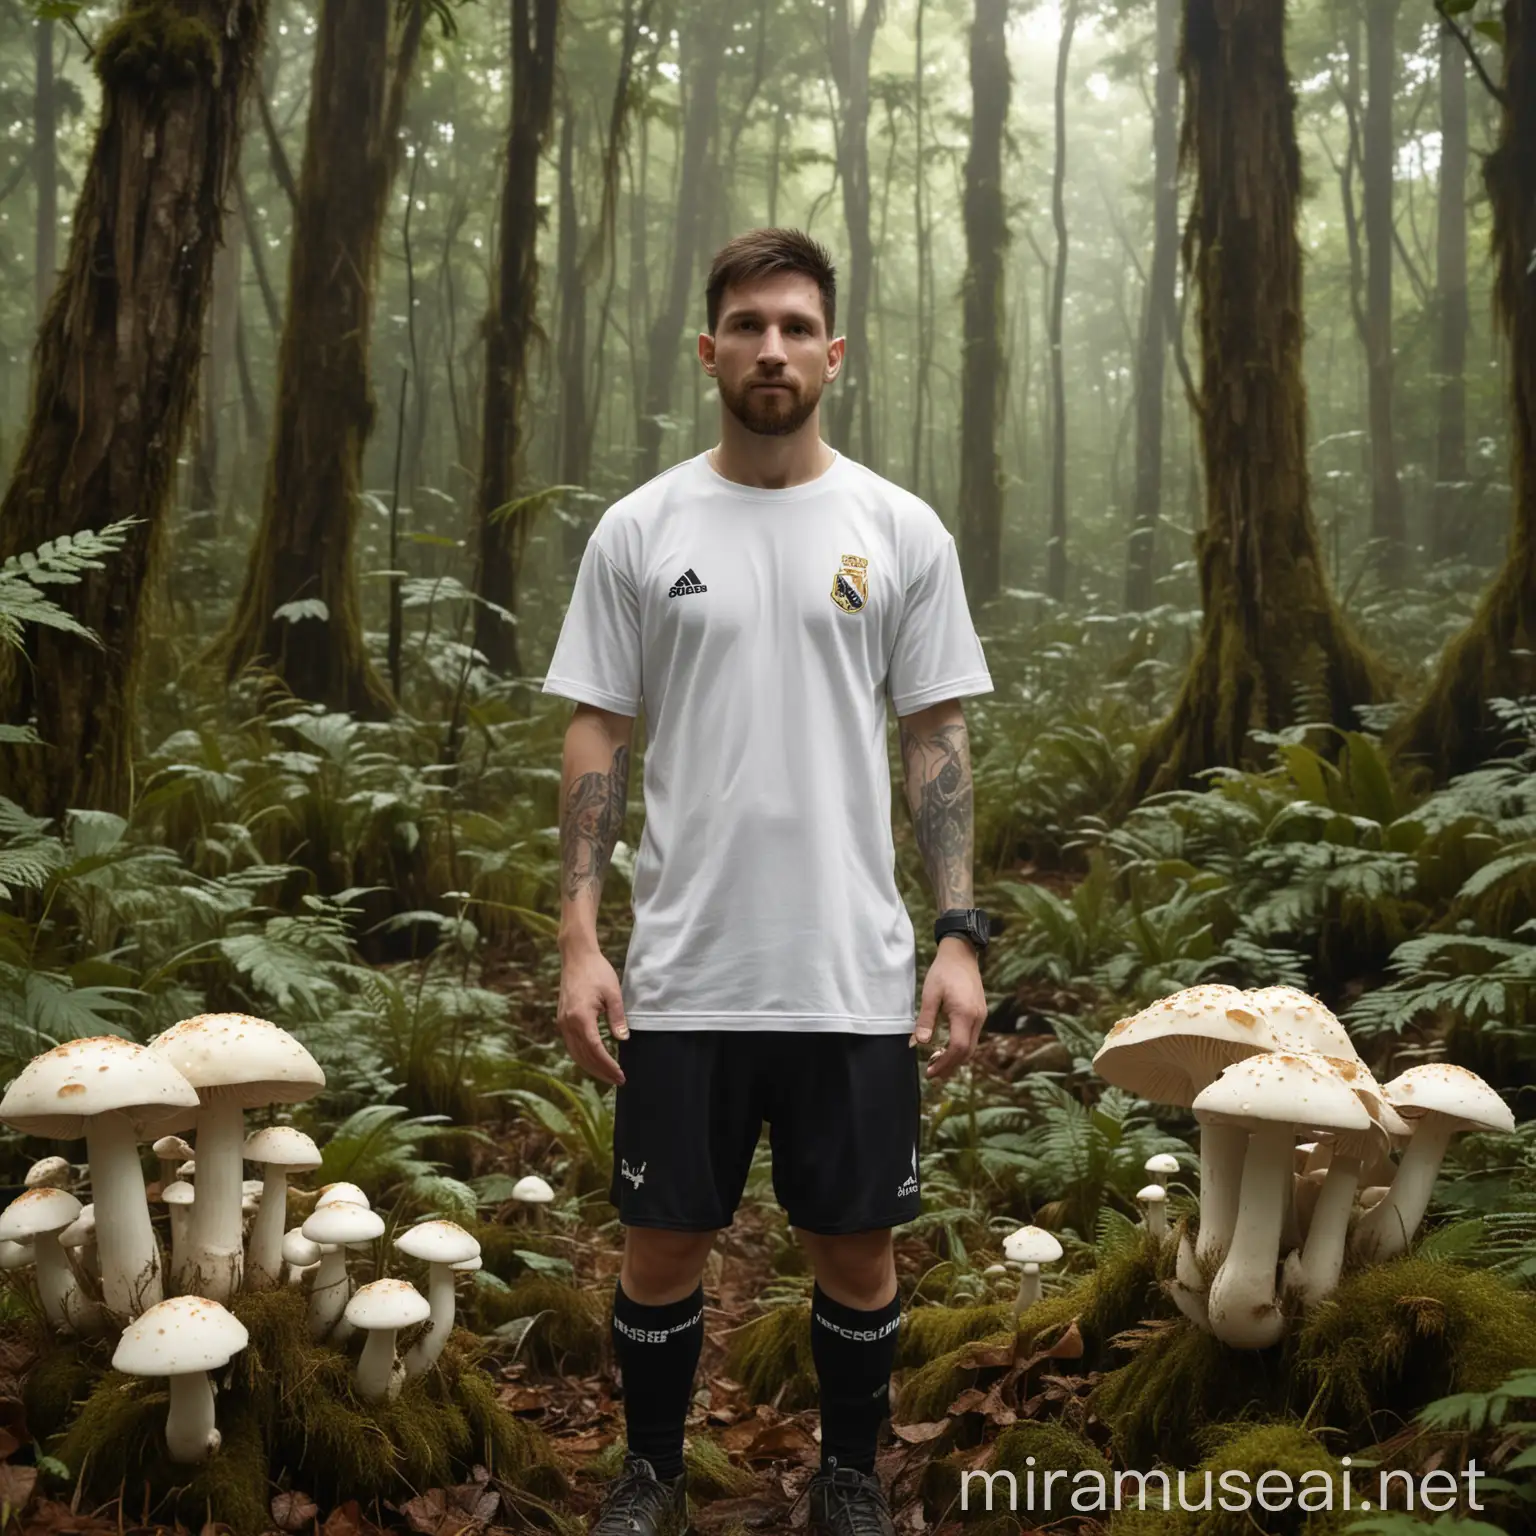 Enchanting Agaricales Mushrooms in Creamy Deep Rainforest with Messi and Argentina Football Tshirt